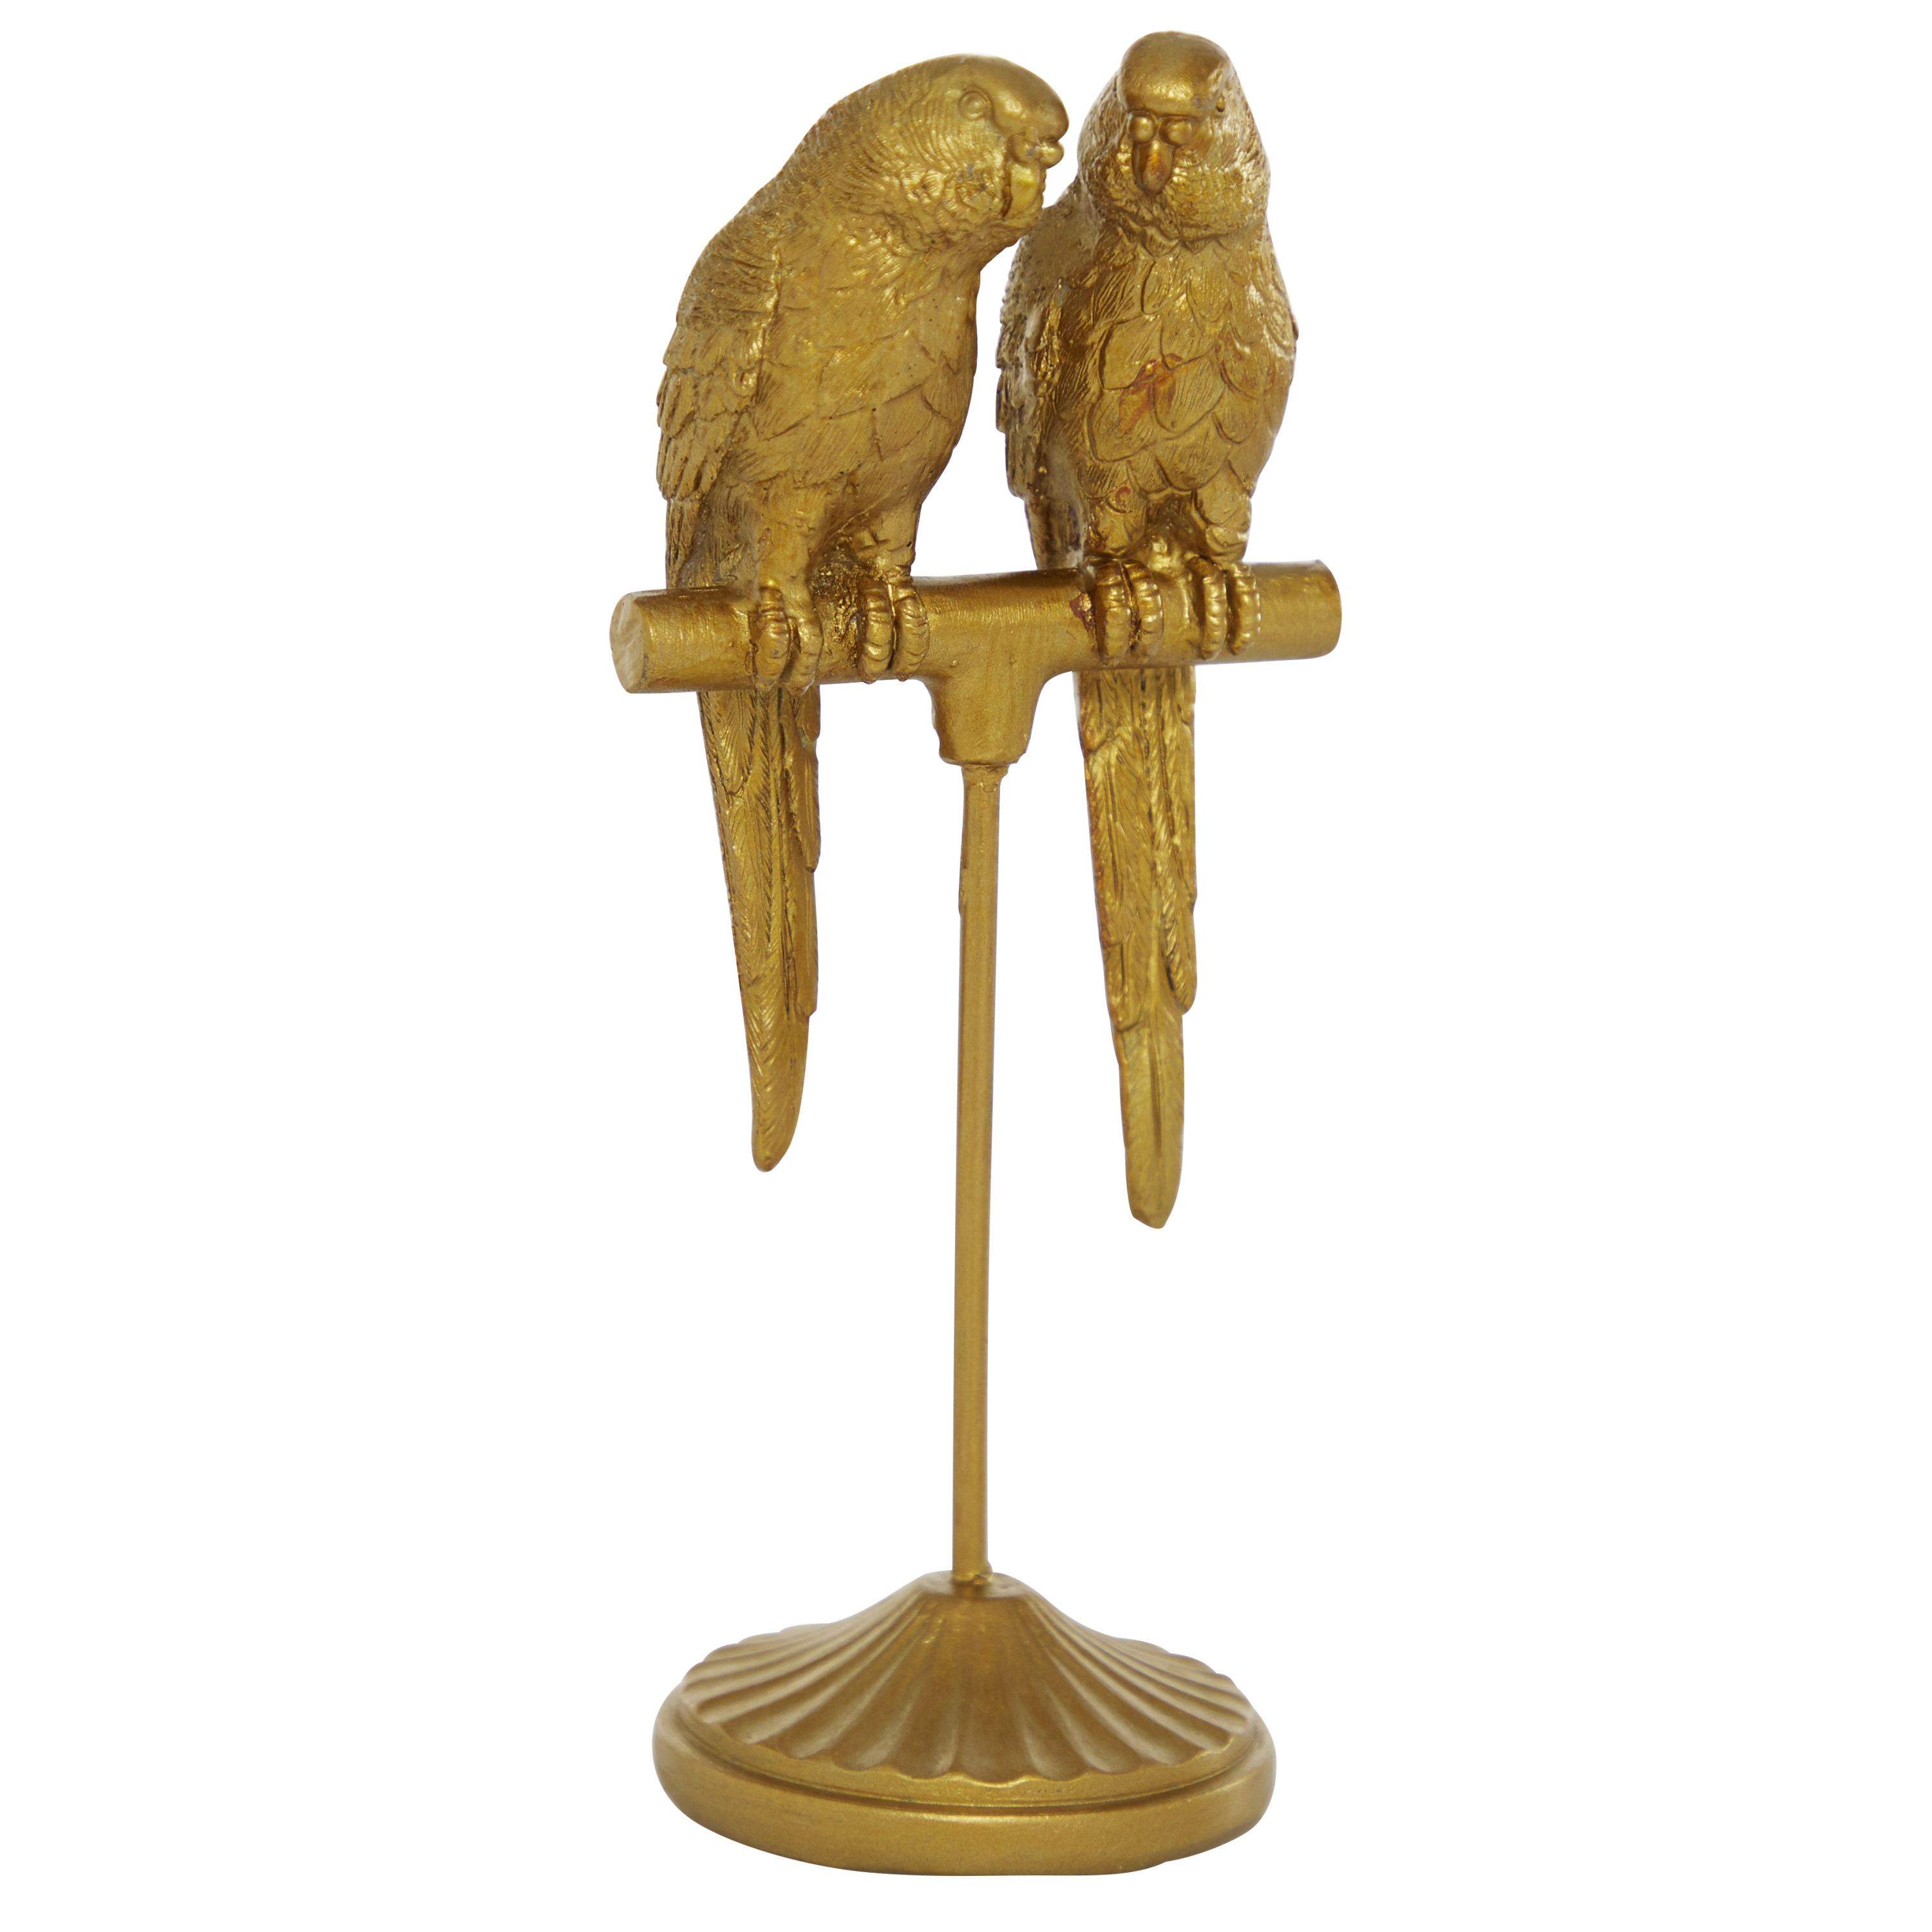 3" x 9" Gold Polystone Parrot Sculpture, by DecMode